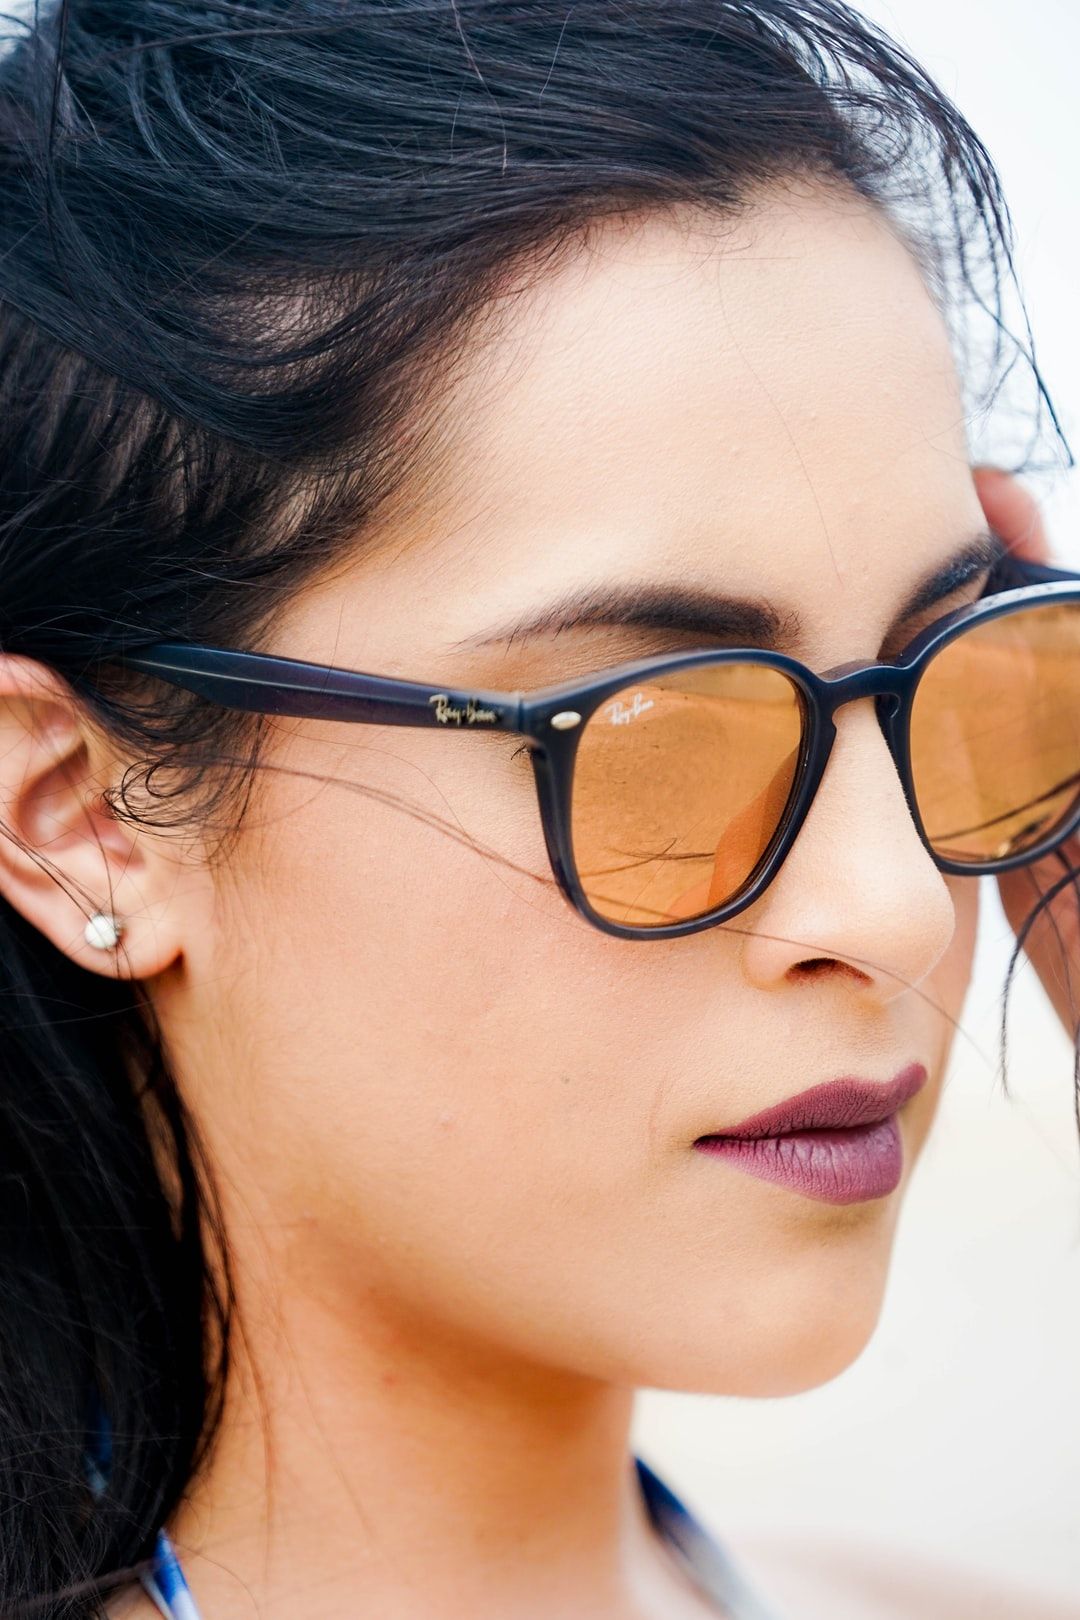 Woman Glasses Picture. Download Free Image